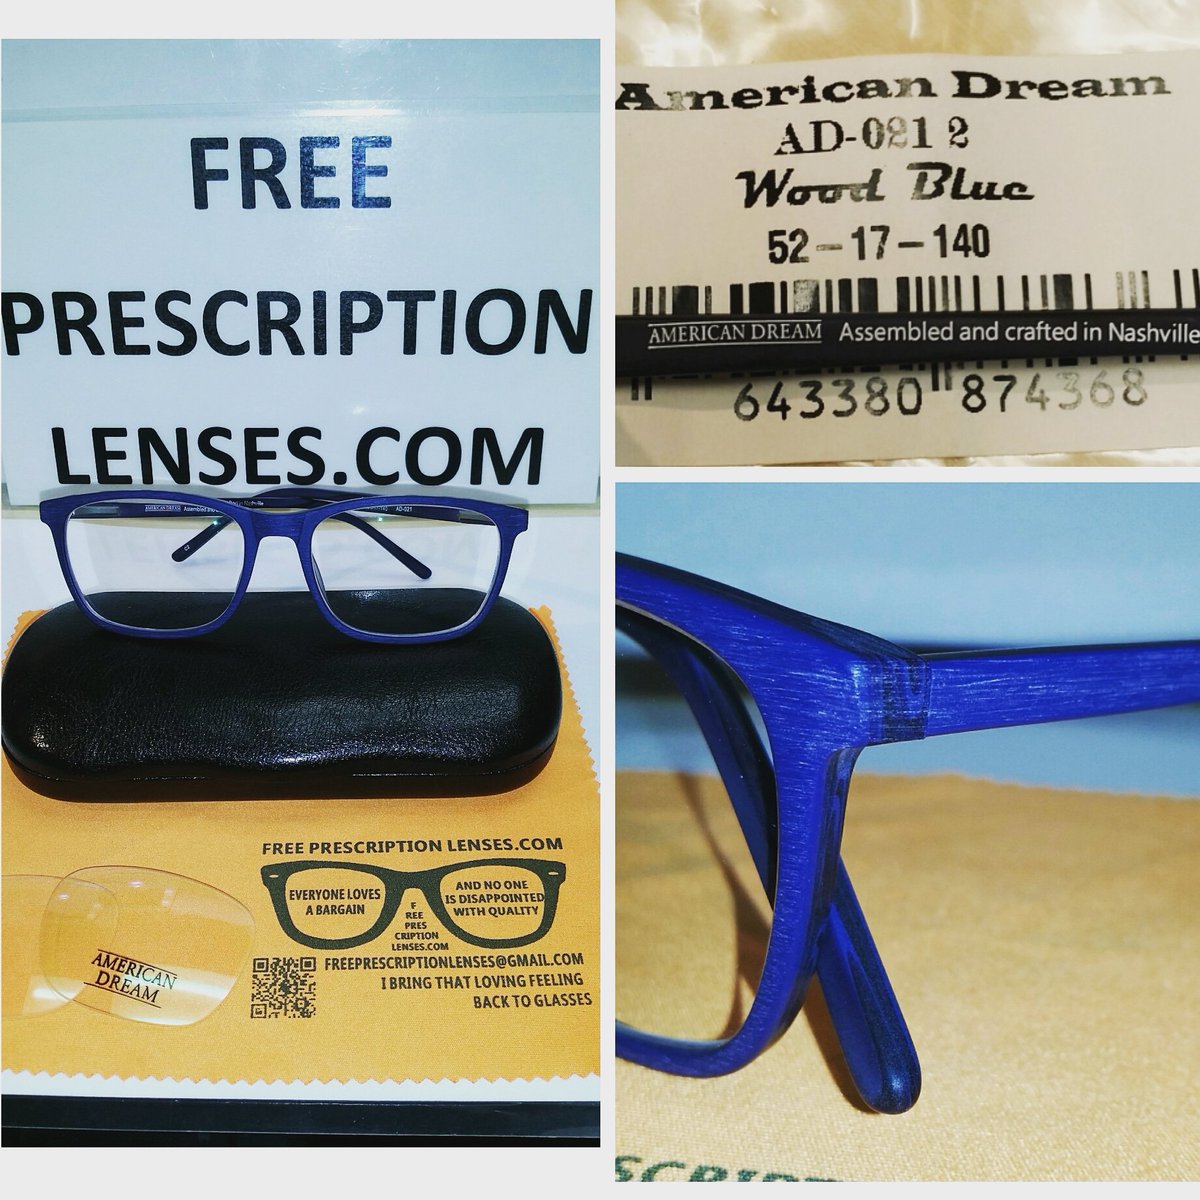 The American made American Dream frame is now available with free Rx lenses! ##freeprescriptionlenses #freerxlenses #americandream #american_eyewear #madeinnashville #madininusa #madeinamerica #americanpride #americanmade #usjobs #americanjobs #buyamerican #keepusjobs #trending